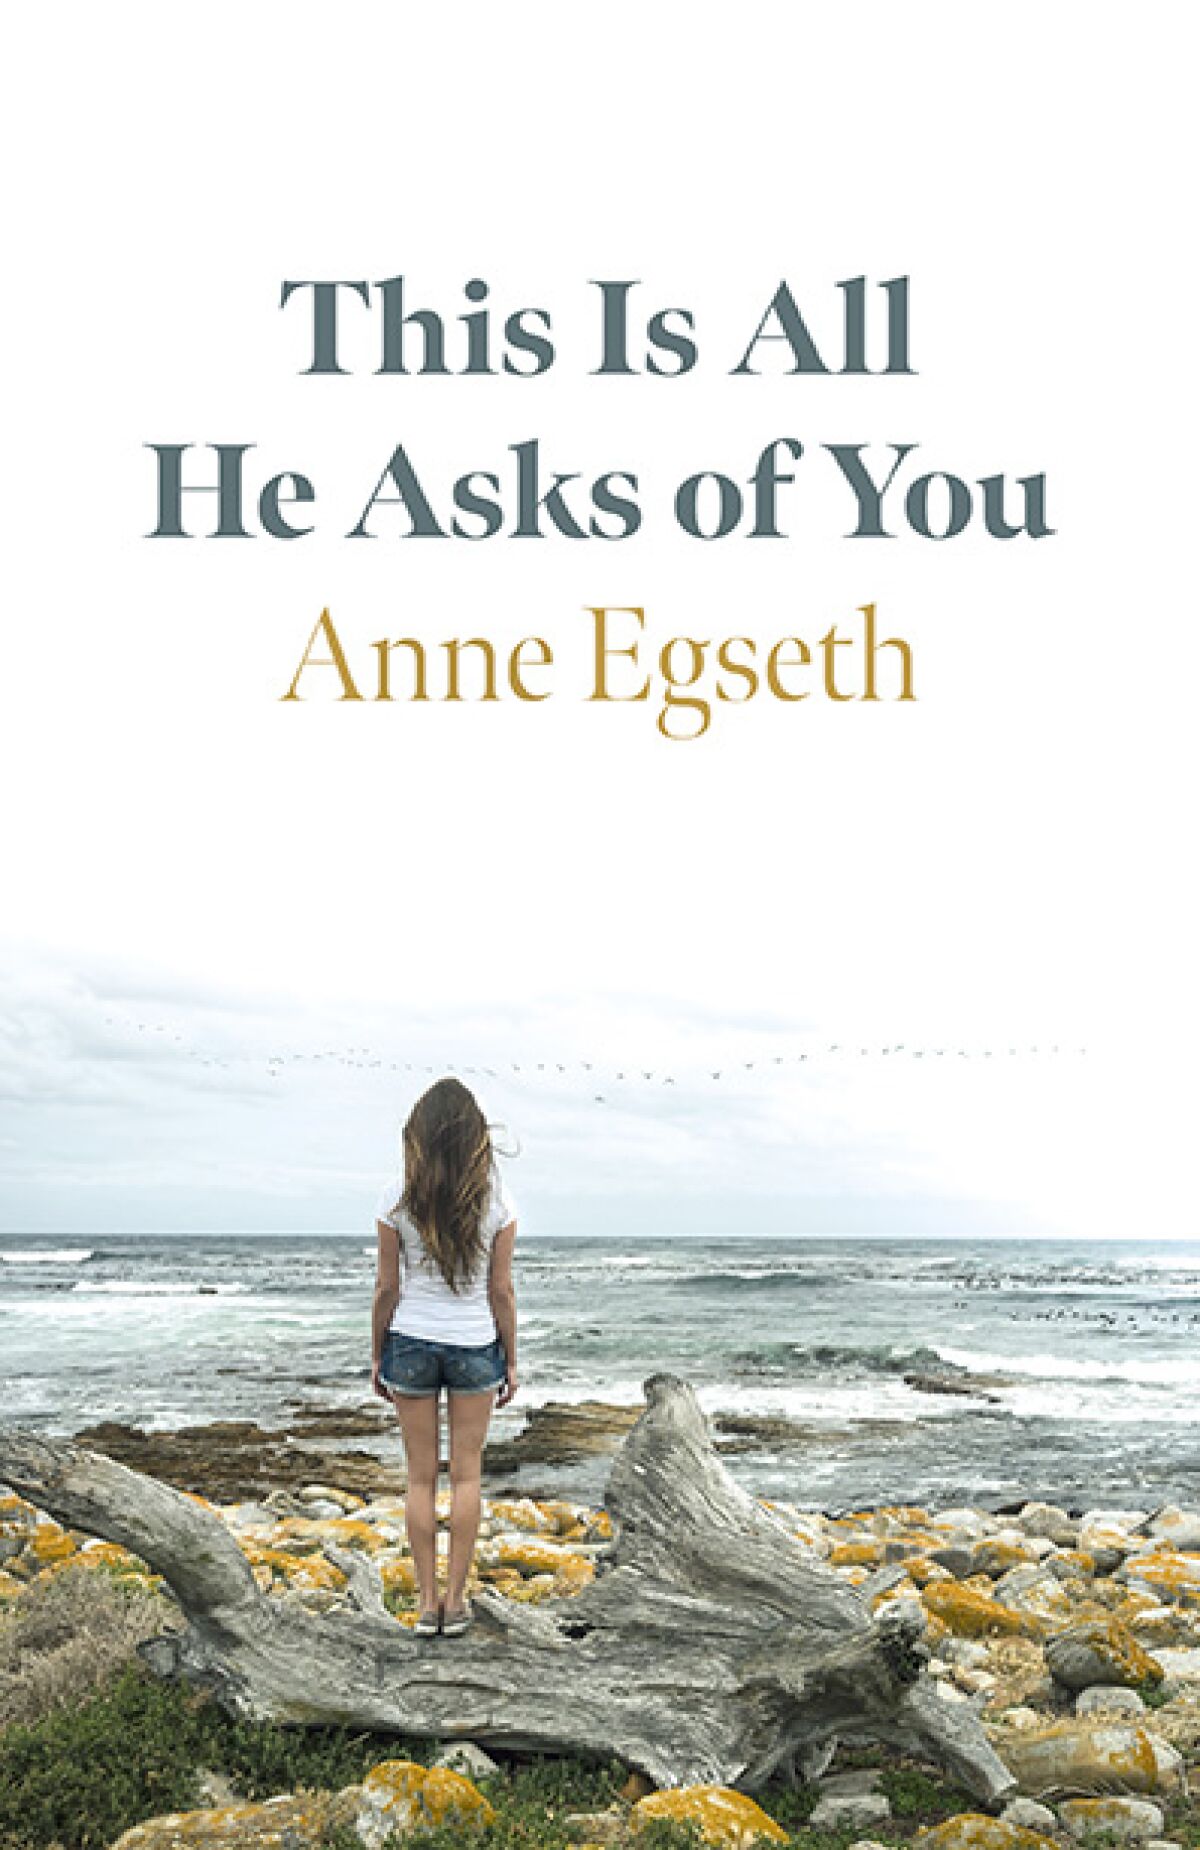 "This is All He Asks of You" is the debut novel of La Jolla resident Anne Egseth.